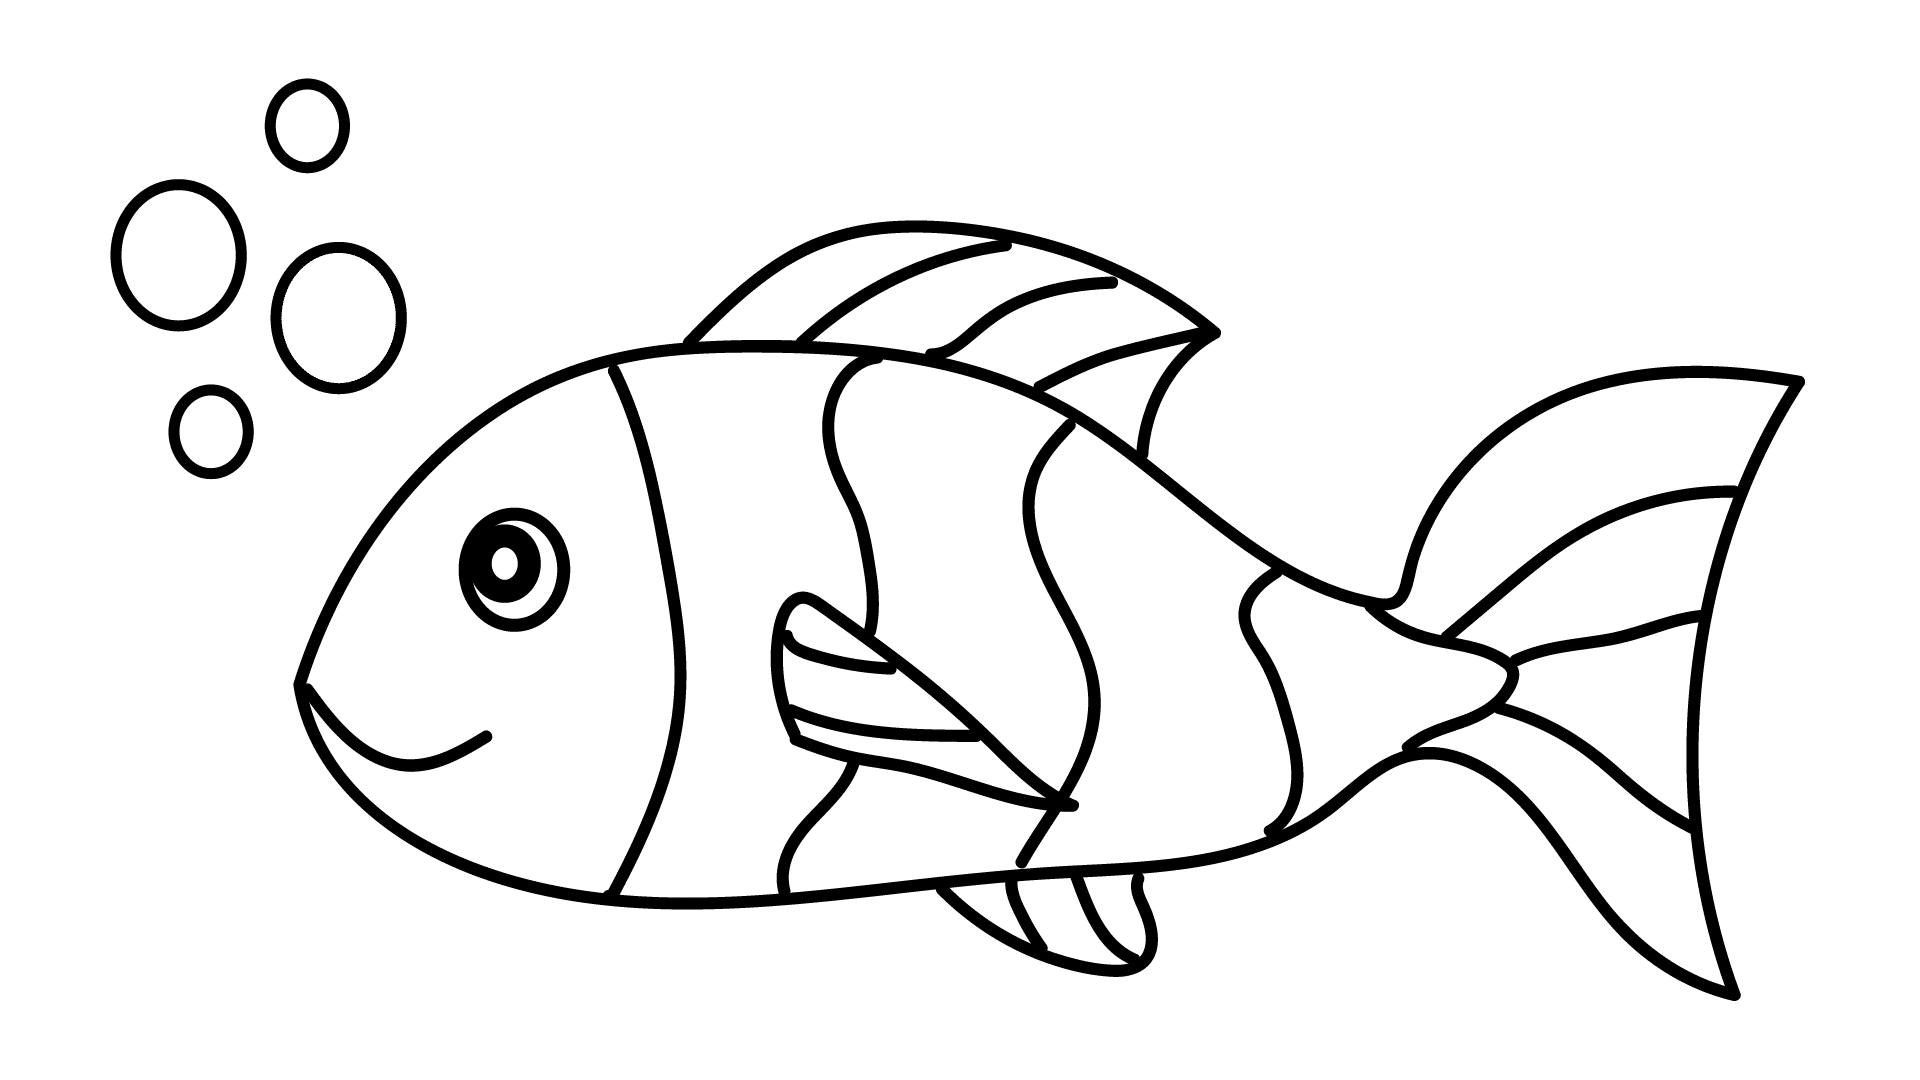 How to draw a fish - Step 7